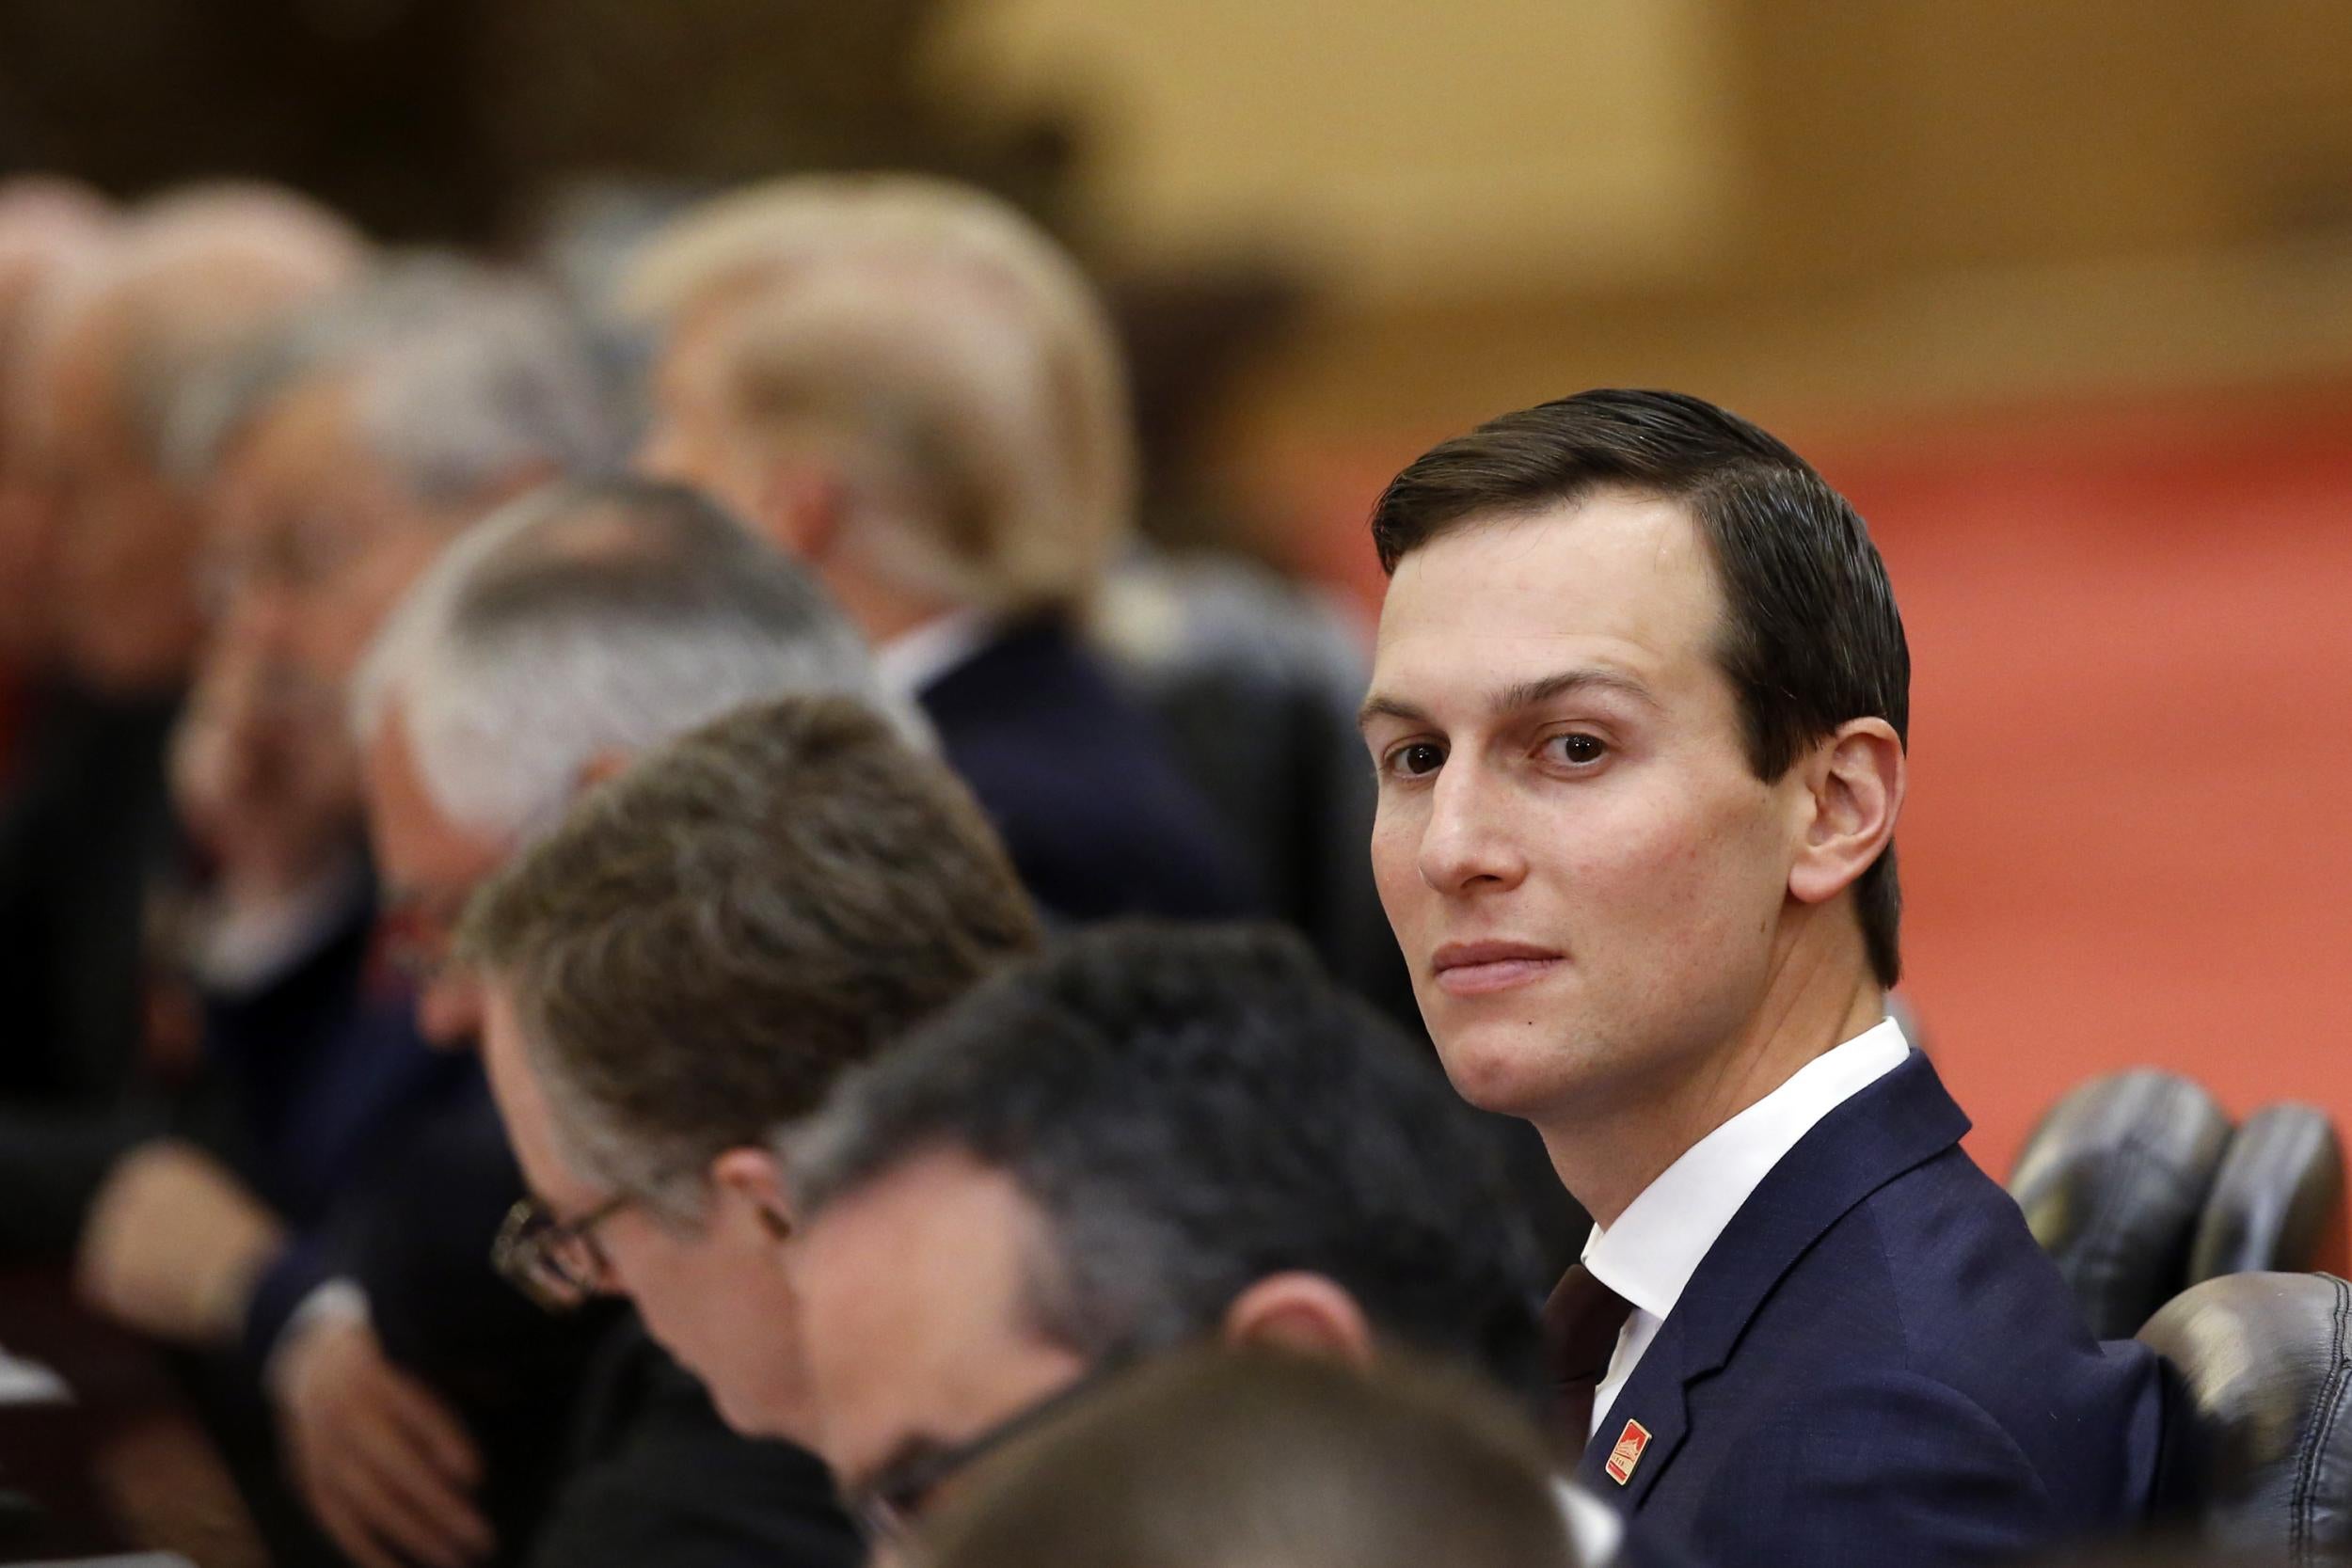 White House Senior adviser Jared Kushner, seen here in Beijing on Nov. 9, 2017, is reportedly concerned about special counsel Robert Mueller's investigation